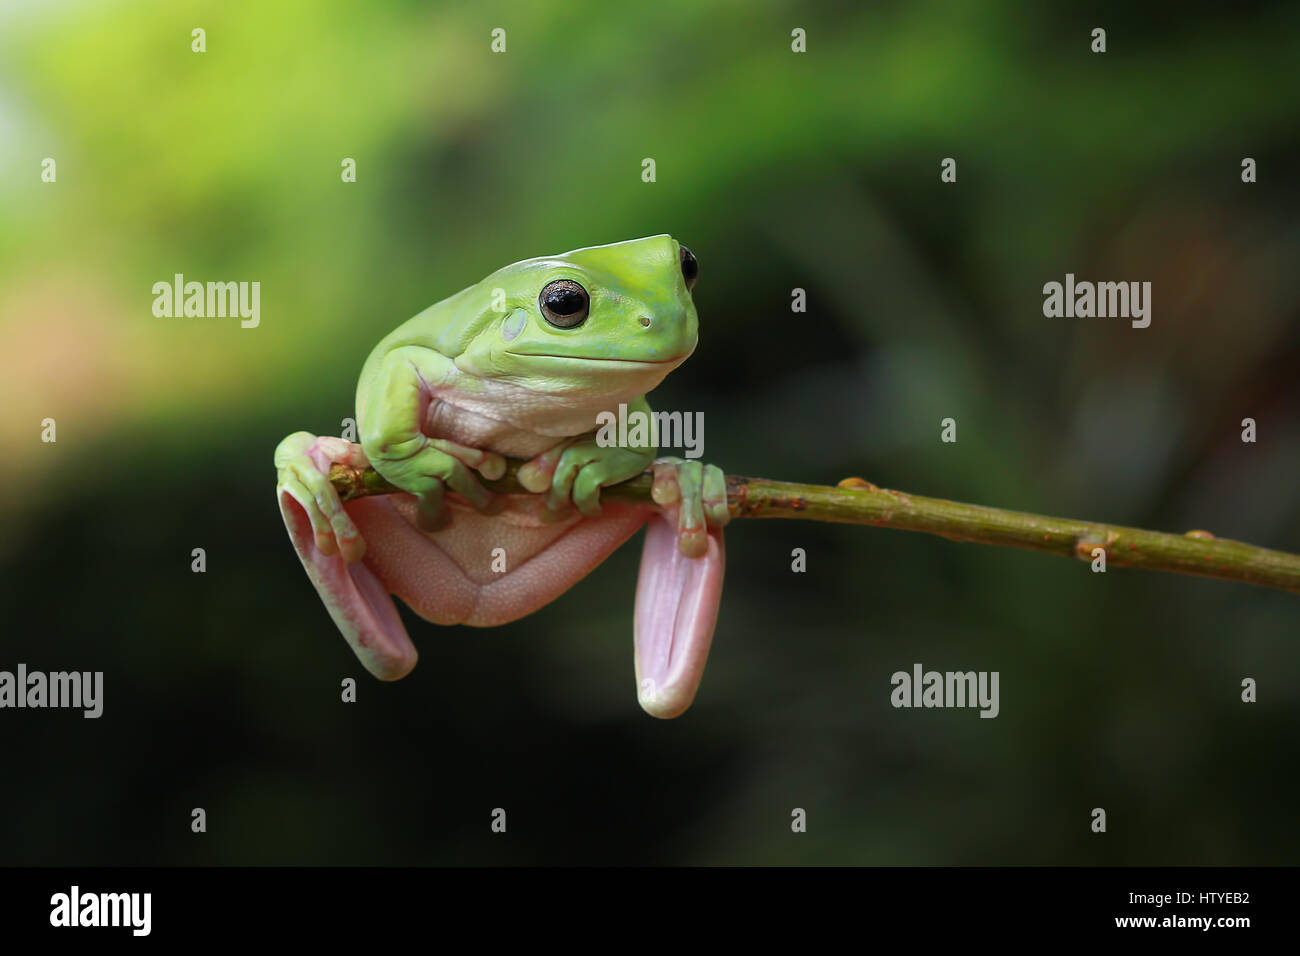 Dumpy frog sitting on branch, Indonesia Stock Photo